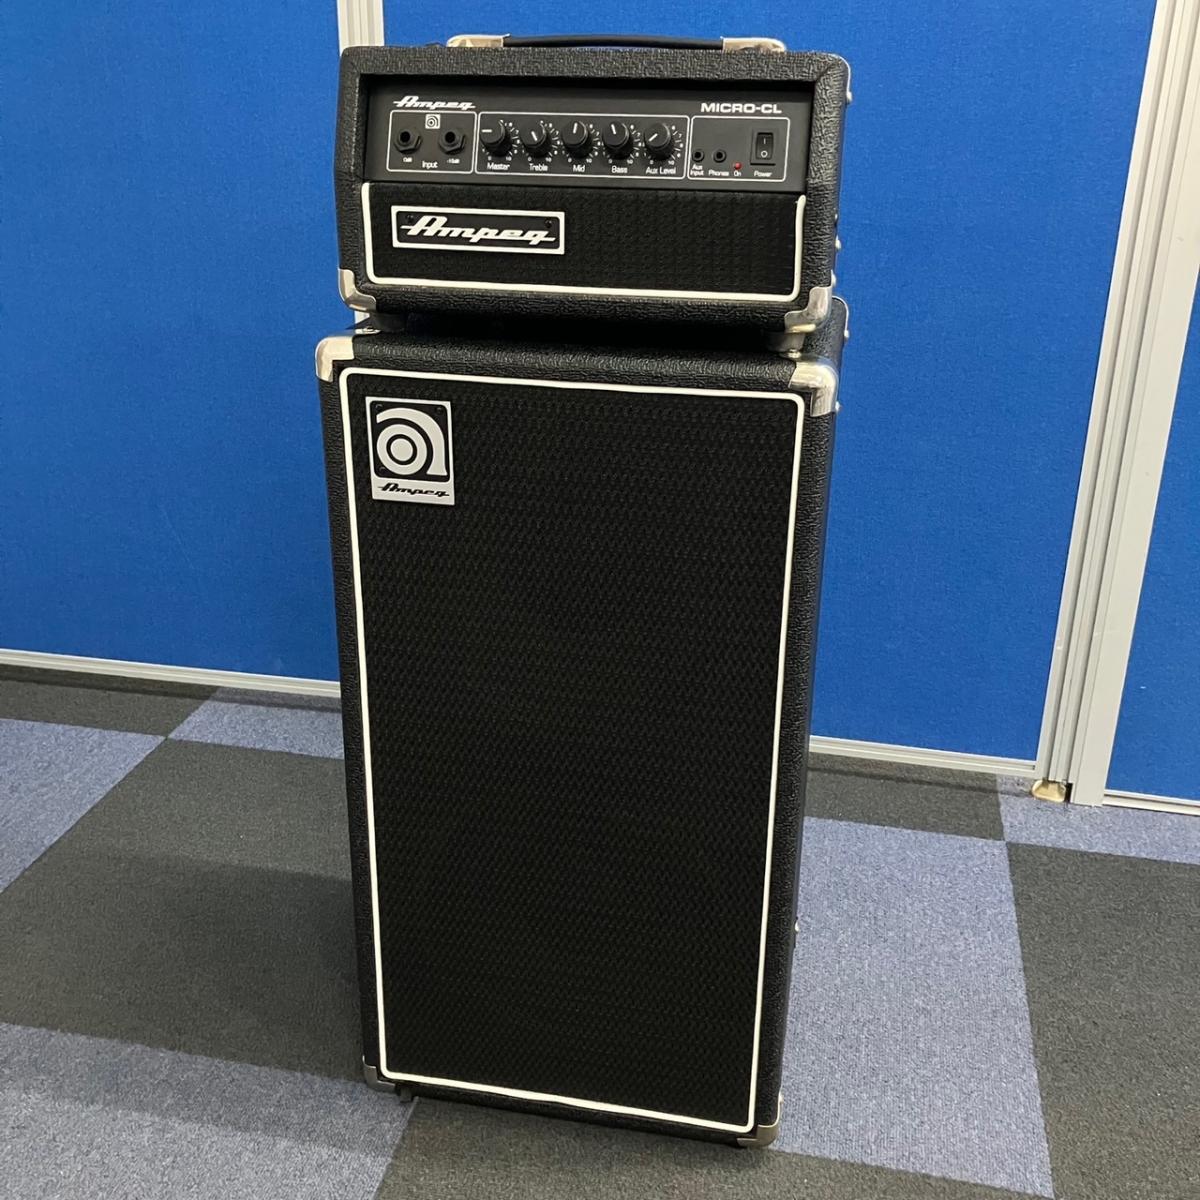 AMPEG ( アンペグ ) Micro CL Stack ベースアンプ - アンプ